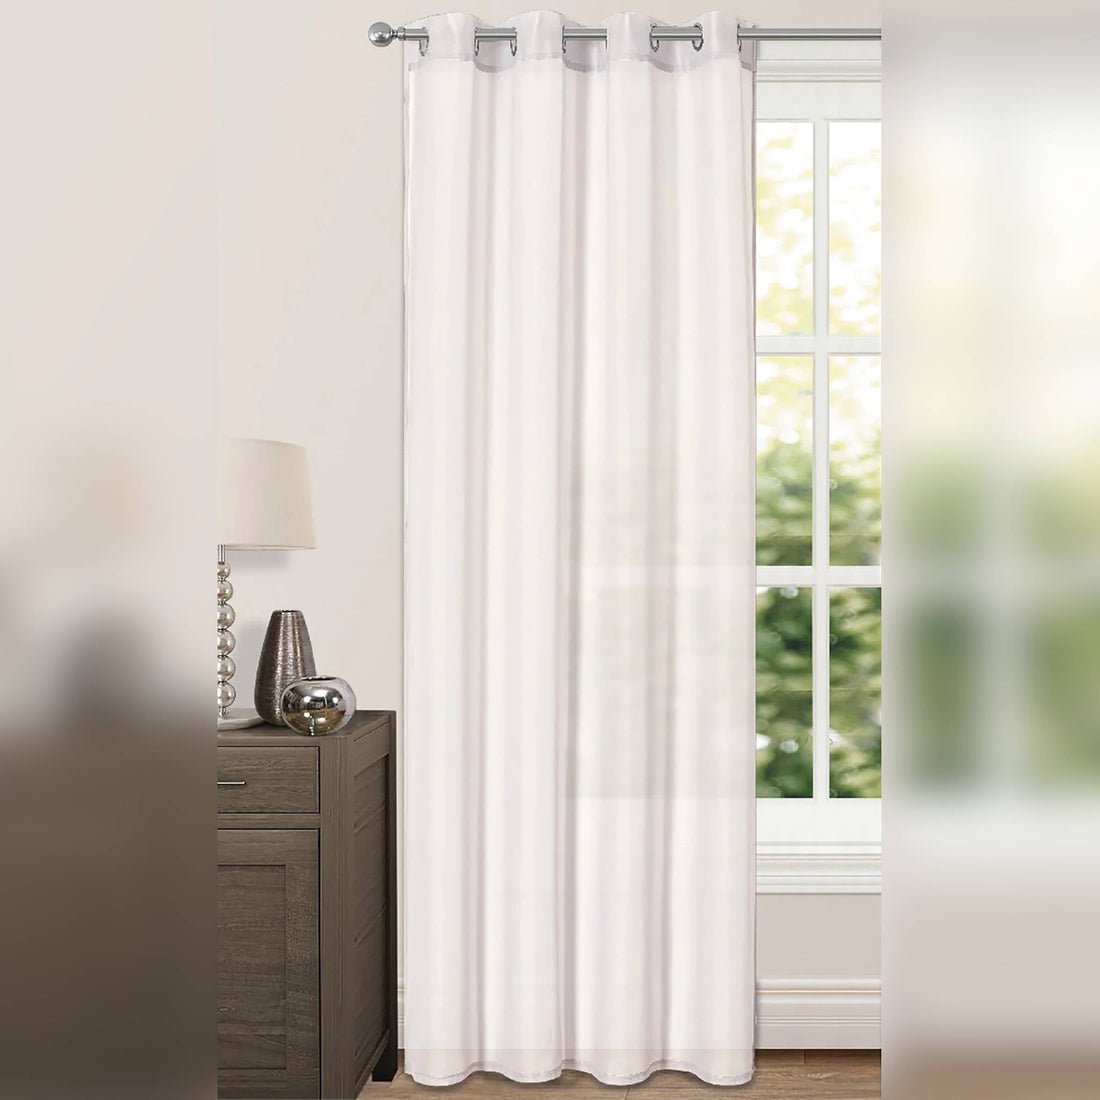 Intimates Riva Voile Panels Ring Top Eyelet Curtains | 59x54in